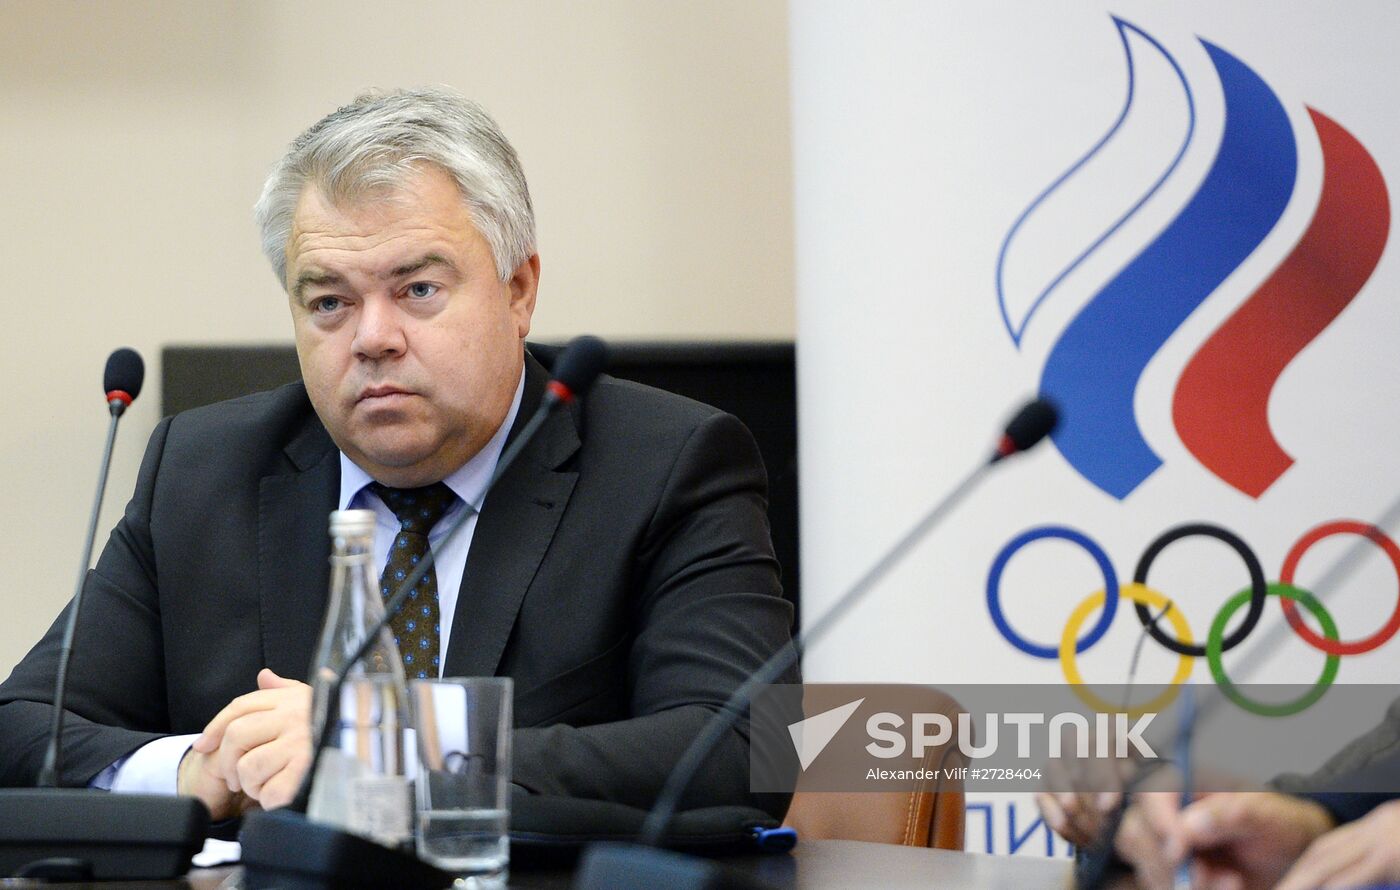 National conference of track and field coaches on preparations for 2016 Olympics